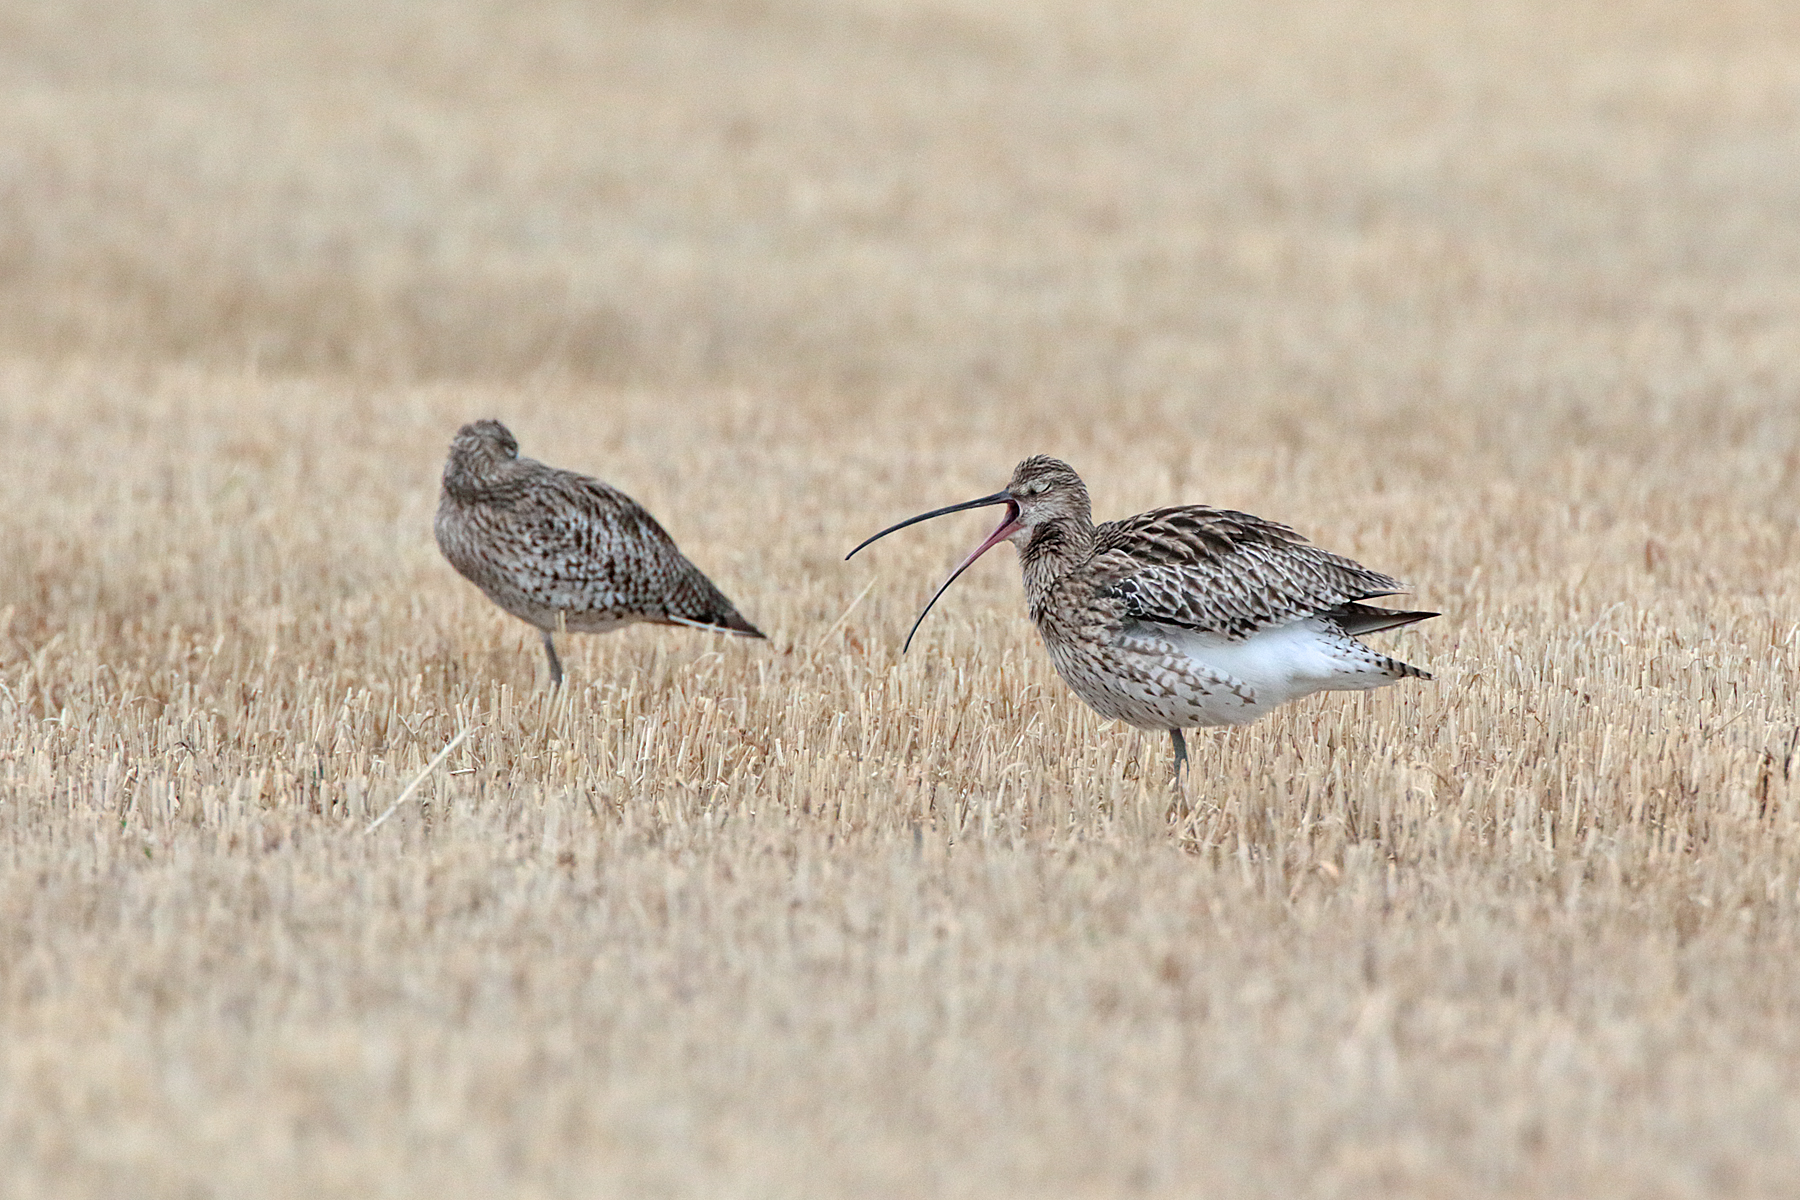 One curlew stands on one leg with head tucked and eyes closed, sleeping. The other bird is yawning a huge yawn, with bill stretched open and eyes closed